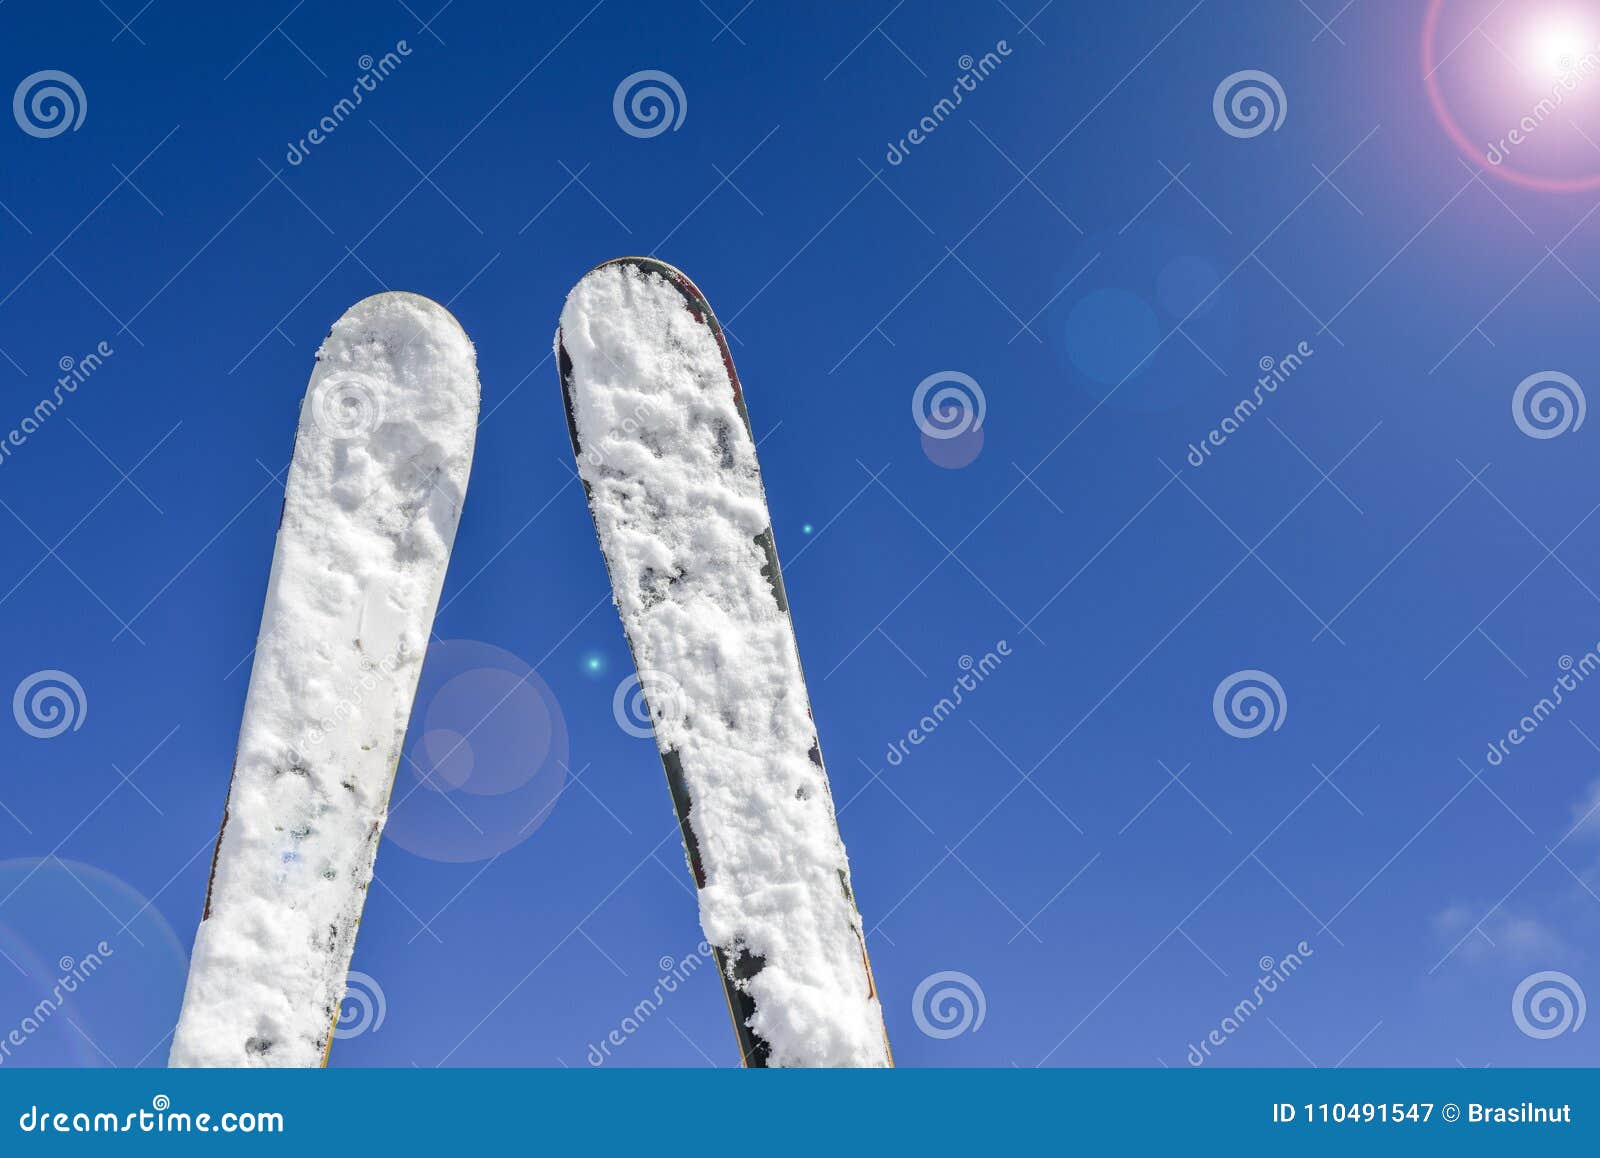 Pair of Skis Against Blue Sky, Sun Flares Stock Image - Image of bokeh ...